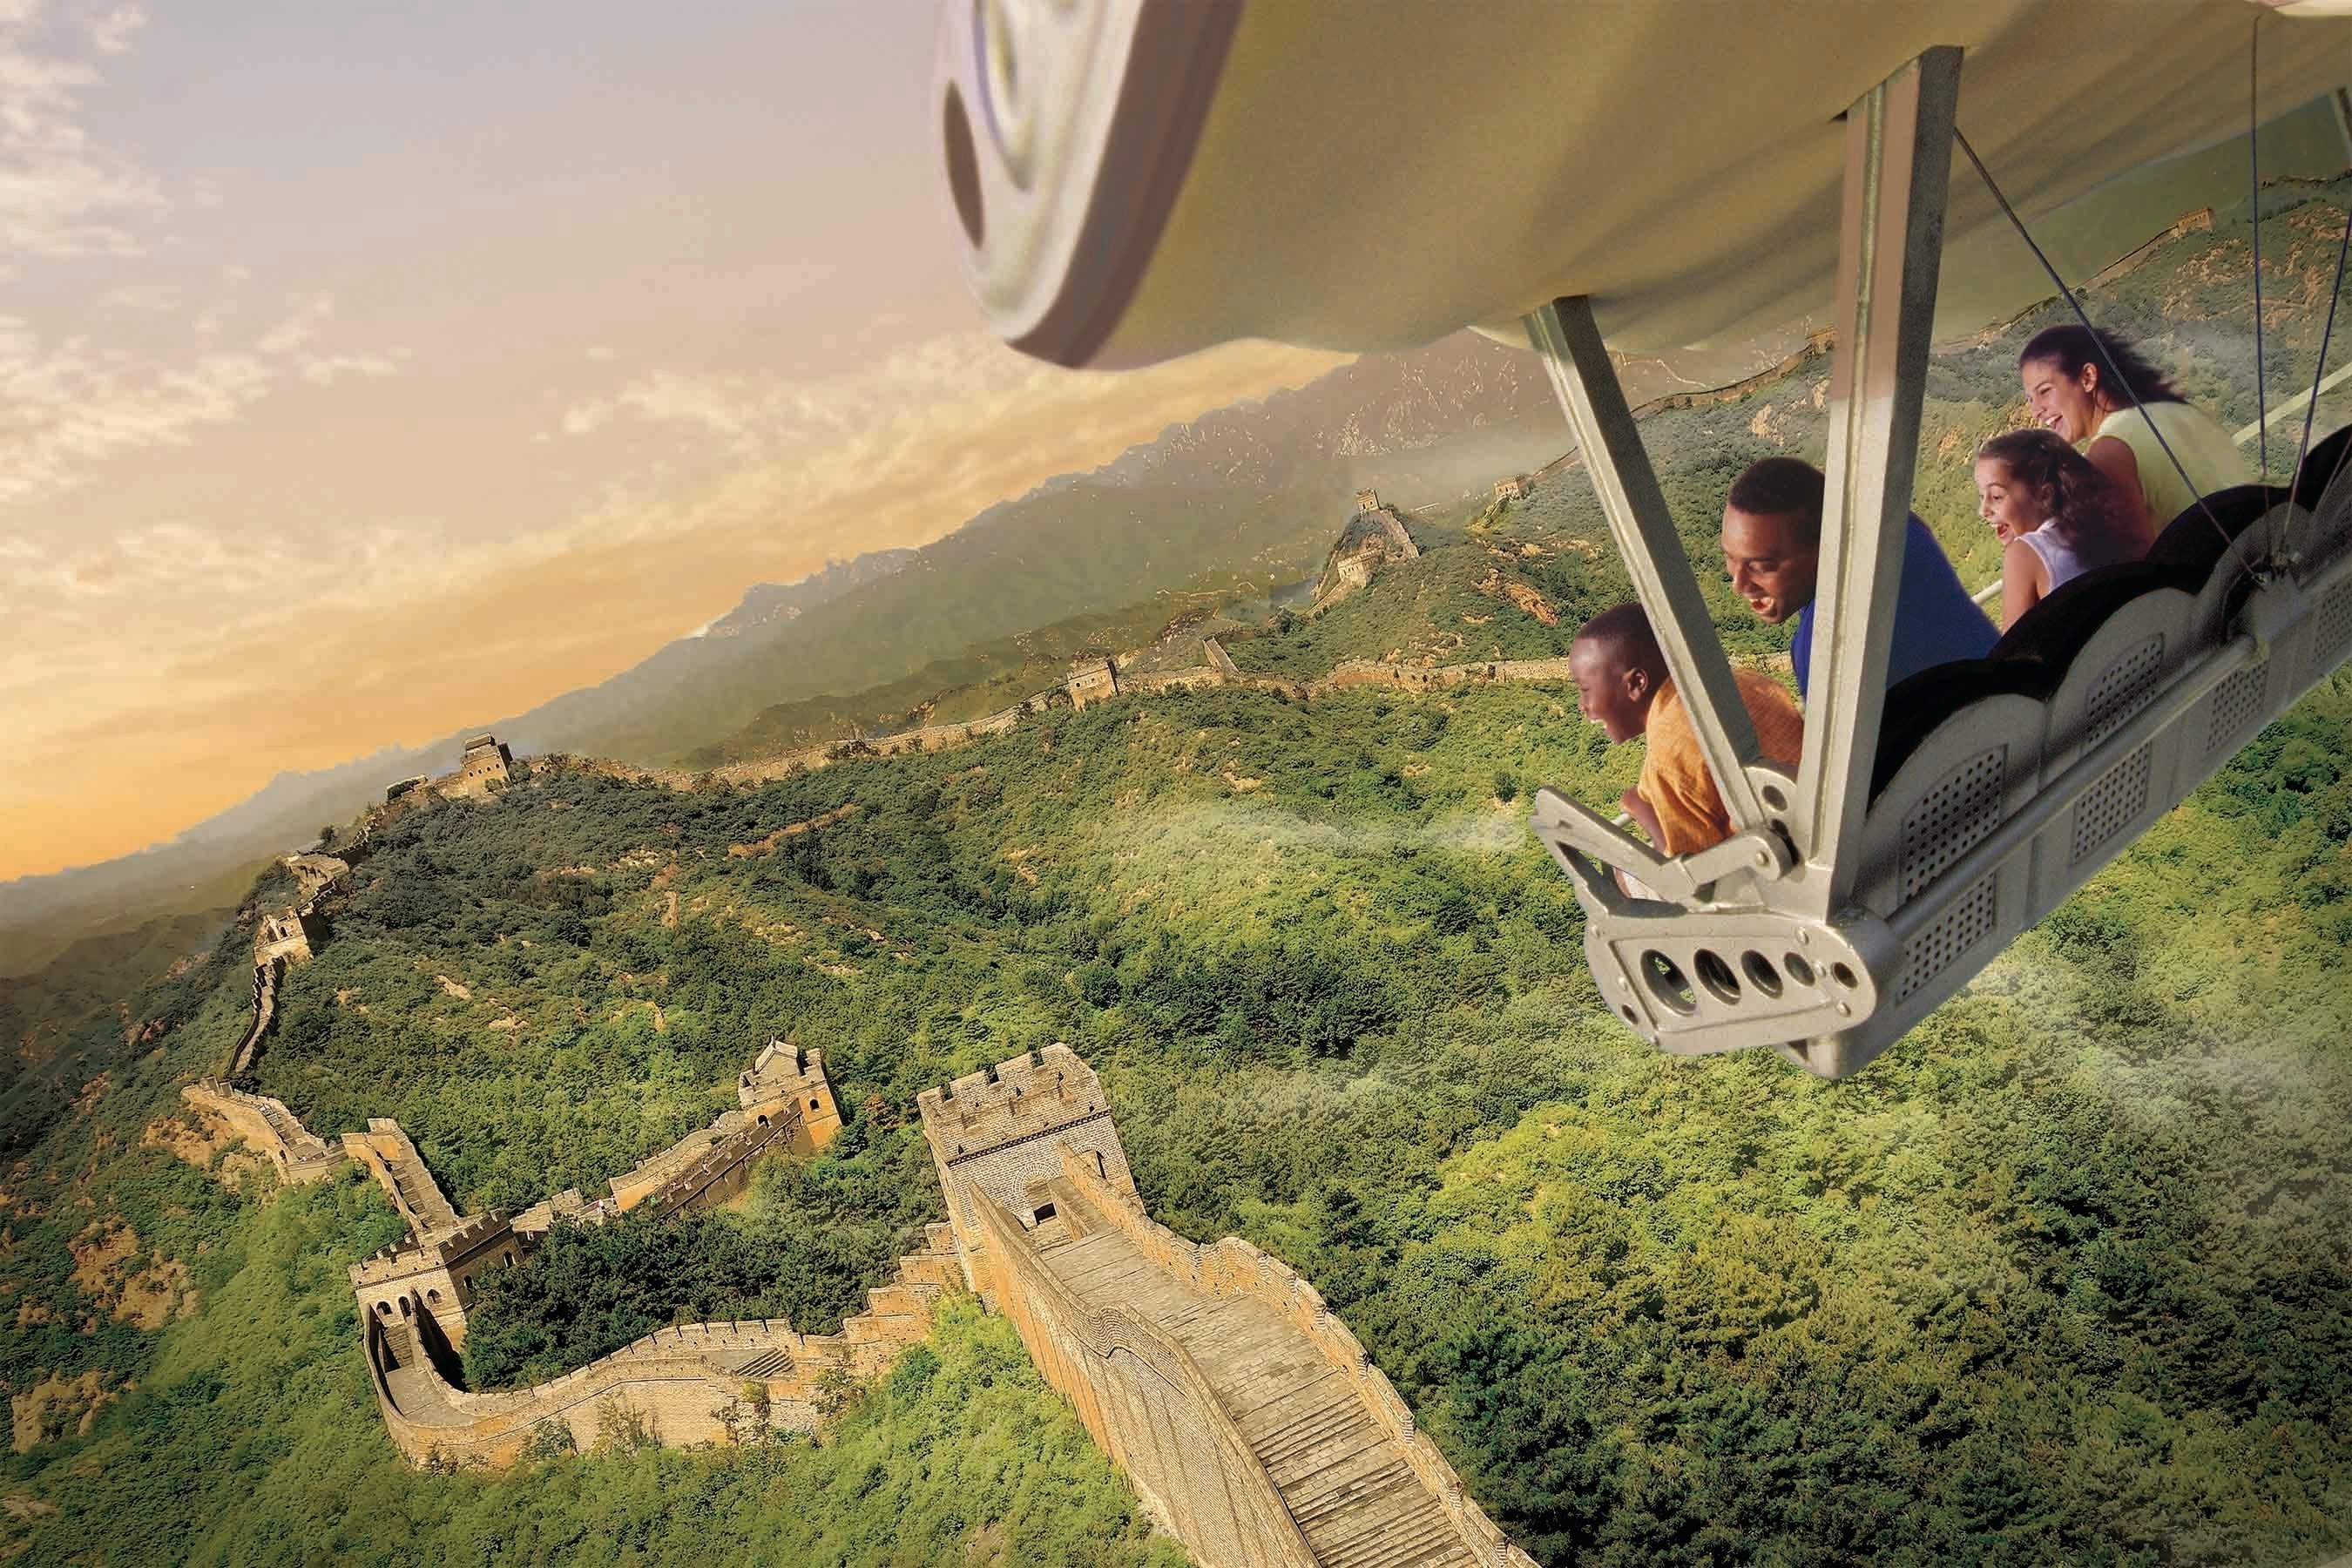 Guests will celebrate the U.S. debut of the new Soarin' Around the World attraction at The Land pavilion this summer. Now with a third Epcot theater, plus new digital screens and projection systems, the expanded attraction takes guests on an exhilarating "flight" above spectacular global landscapes and man-made wonders. (Photo illustration, Disney)